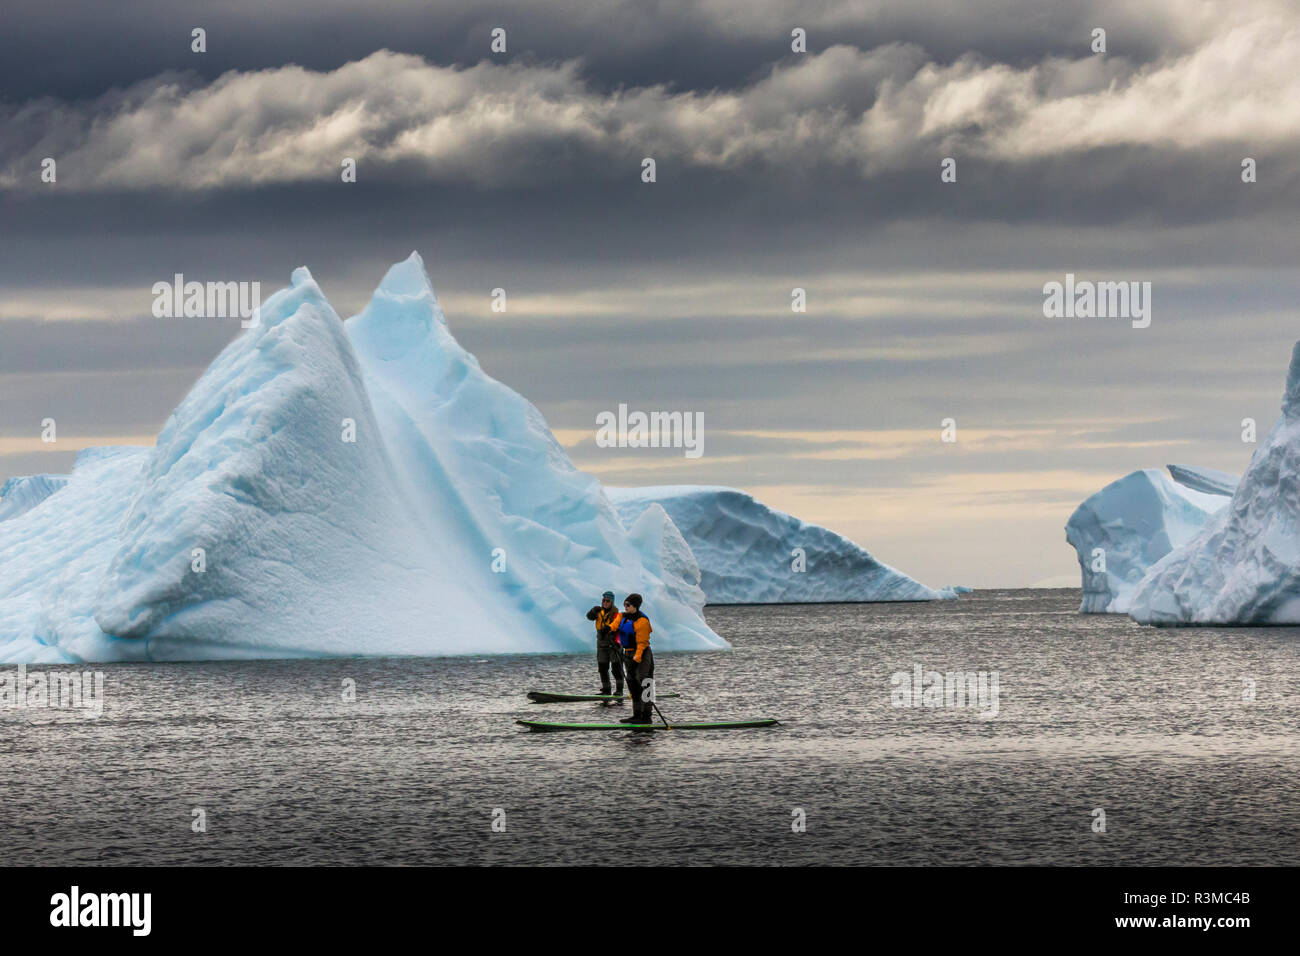 Paddleboarders and icebergs, Antarctica Stock Photo